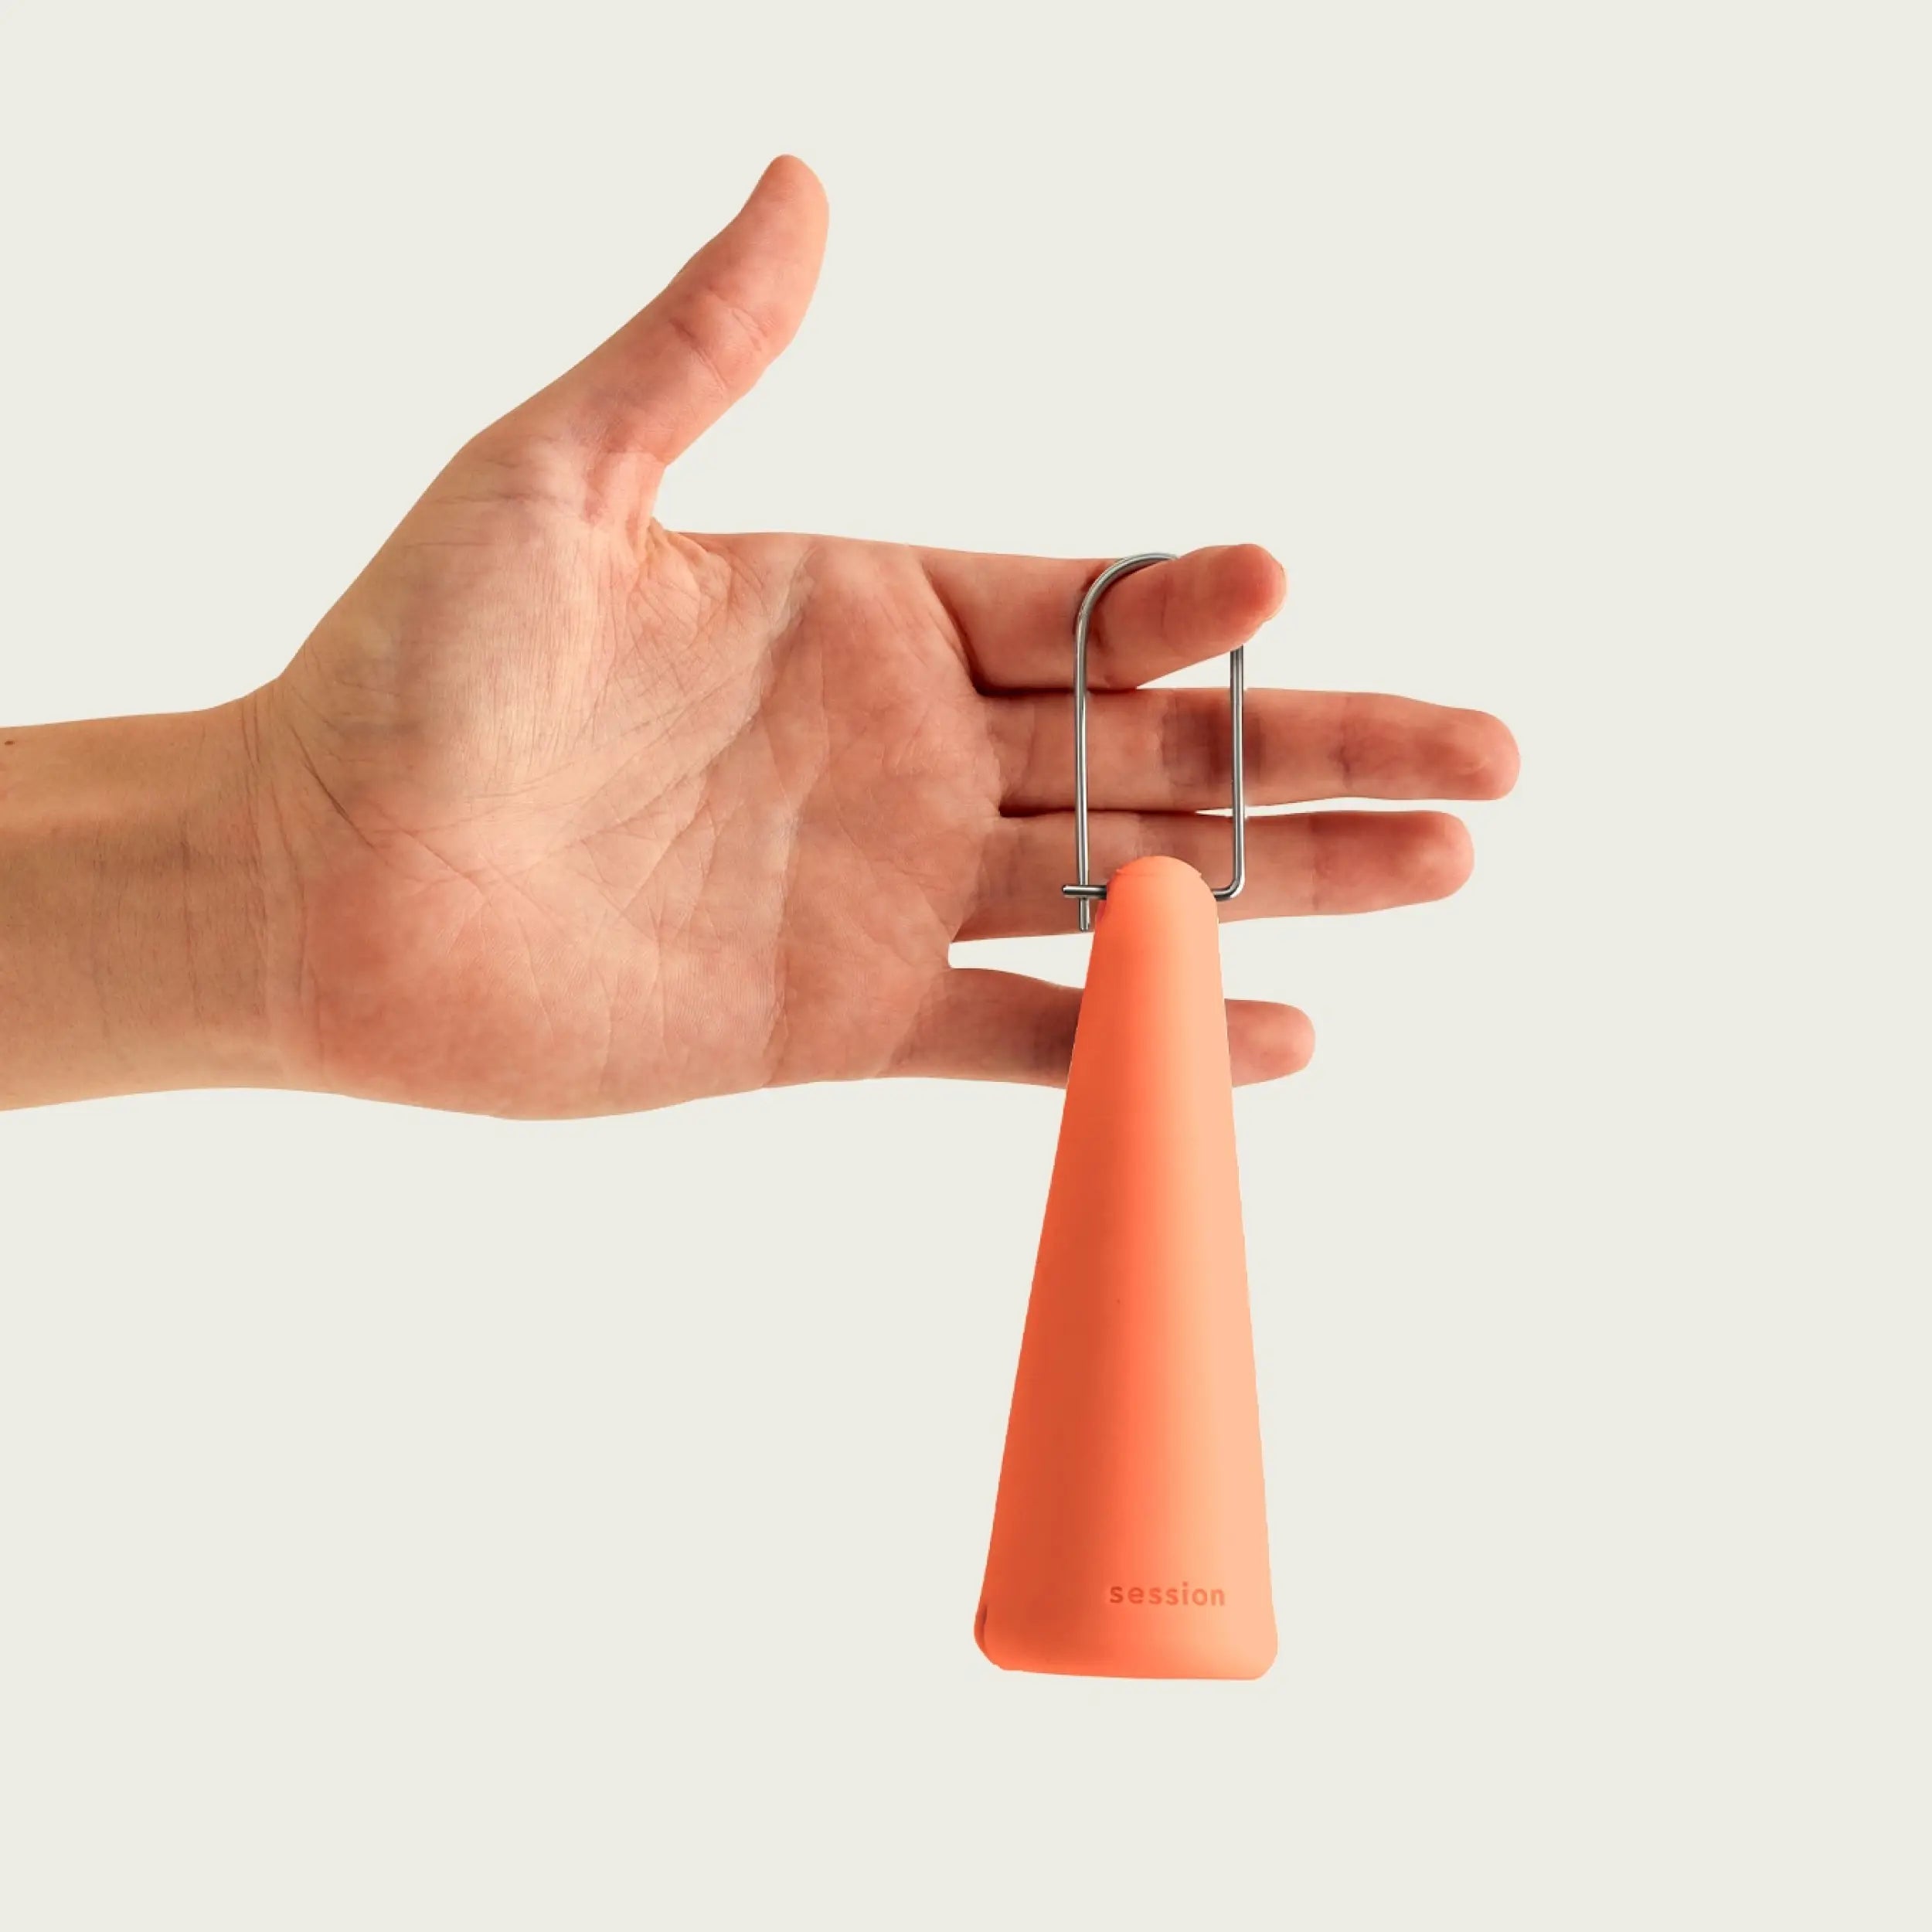 Enhance Your Session with Session Goods Silicone Sleeve in Horizon Orange.